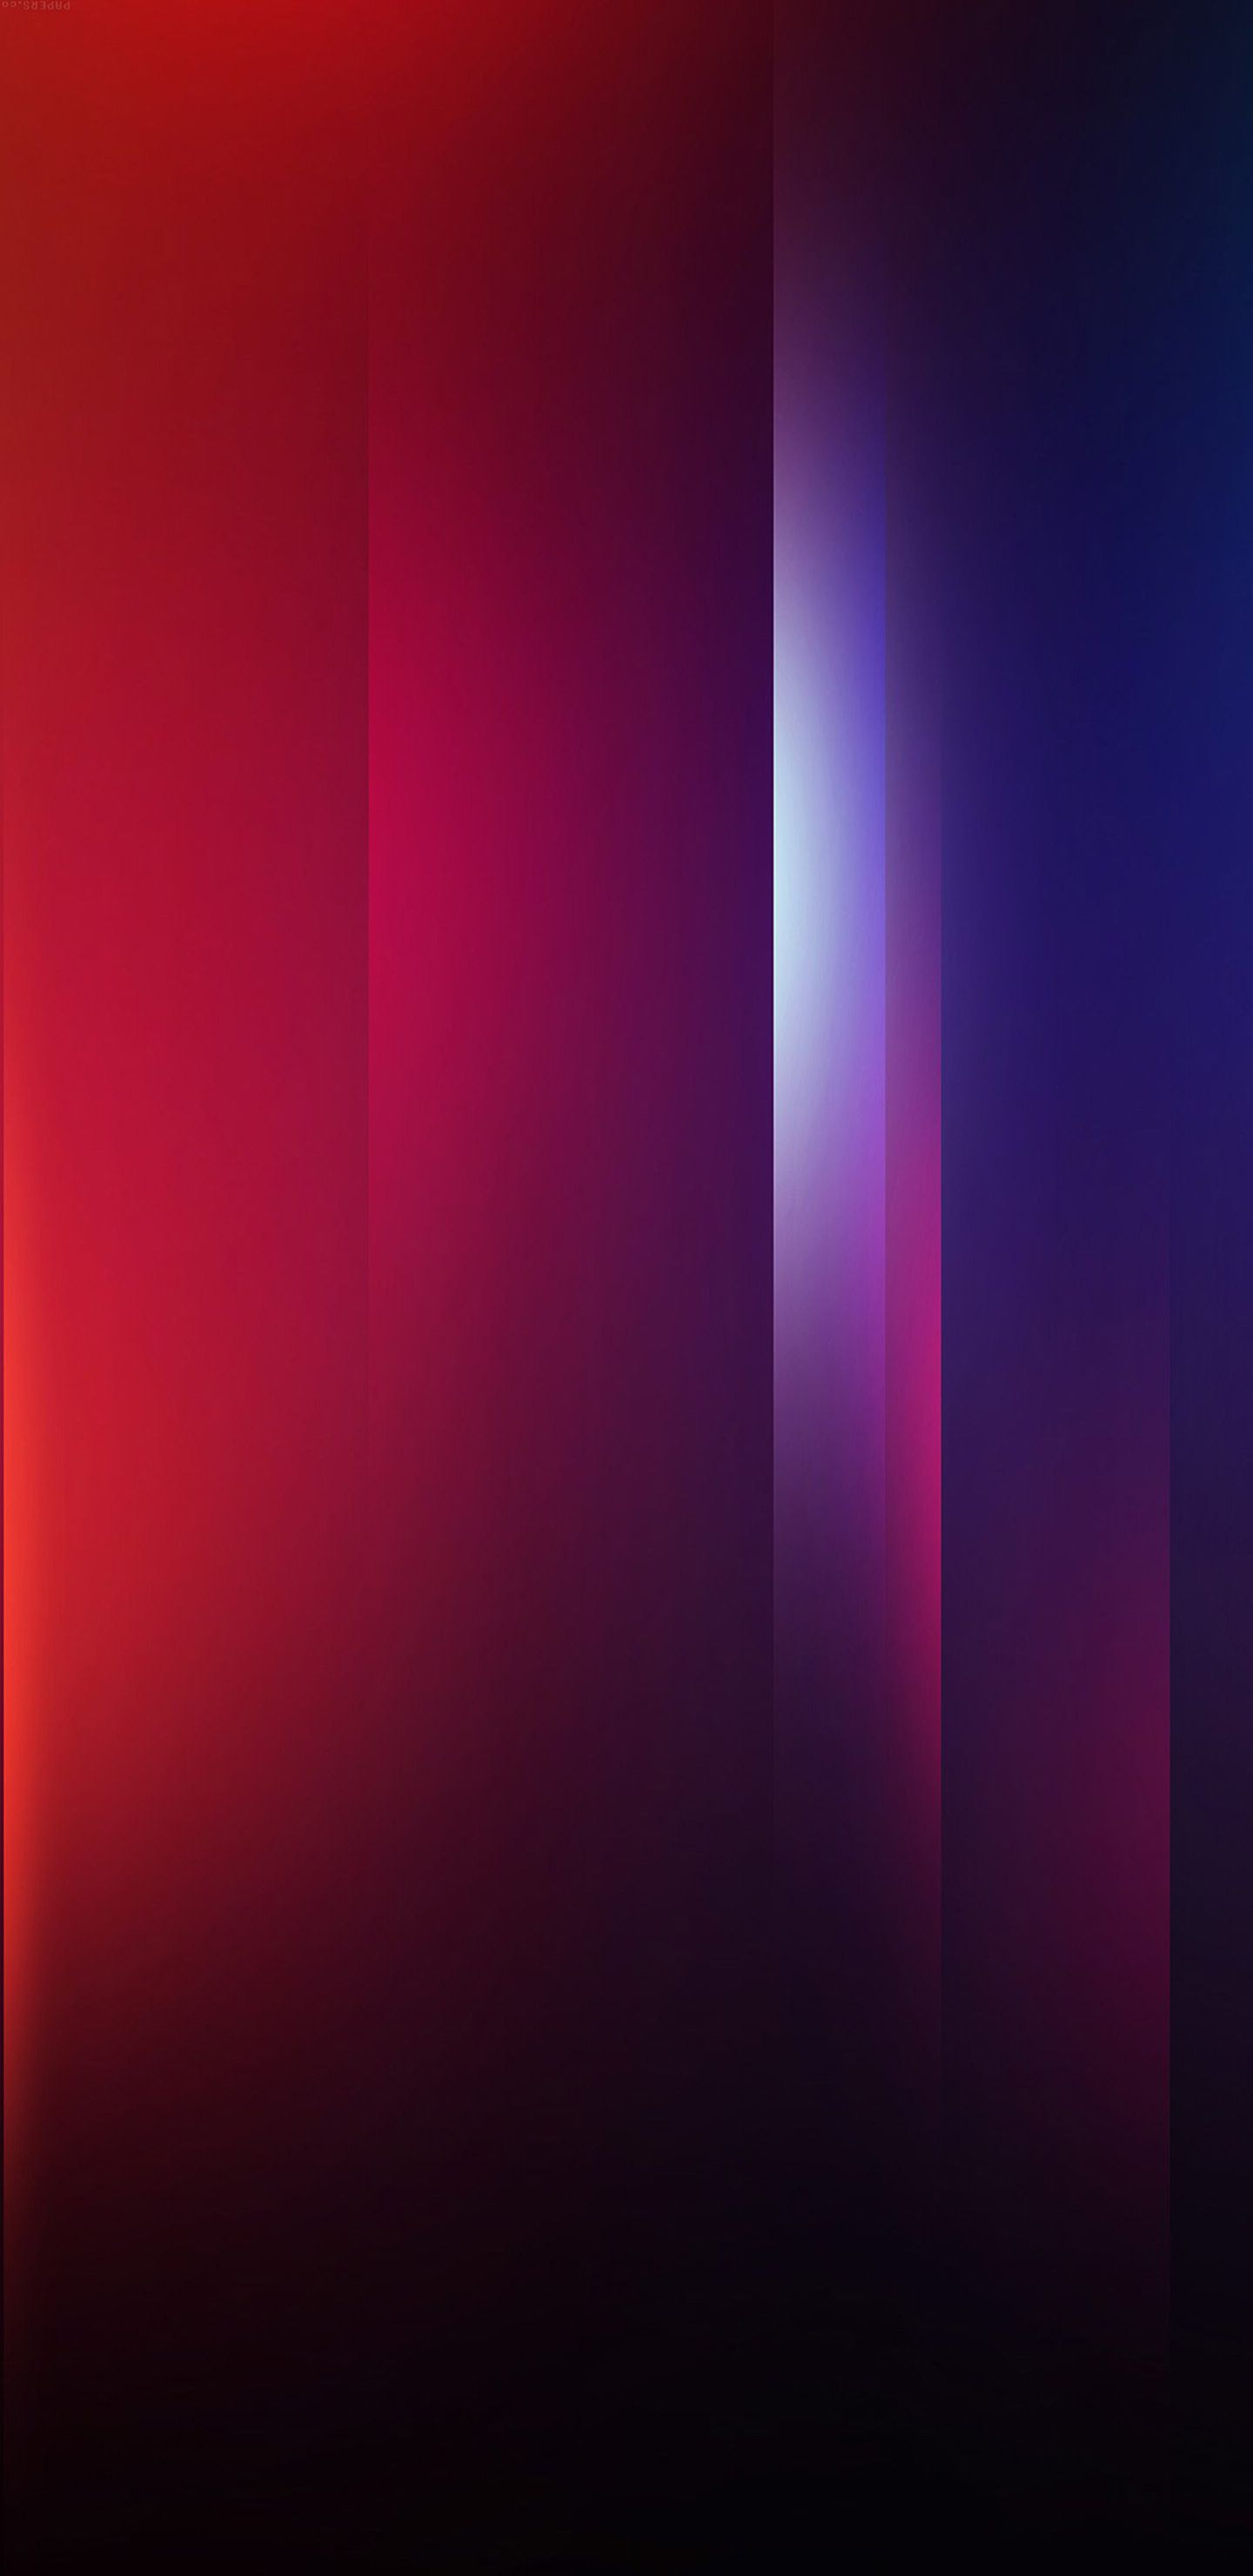 1440x2960 Red And Purple Wallpaper on Sale, 52% OFF